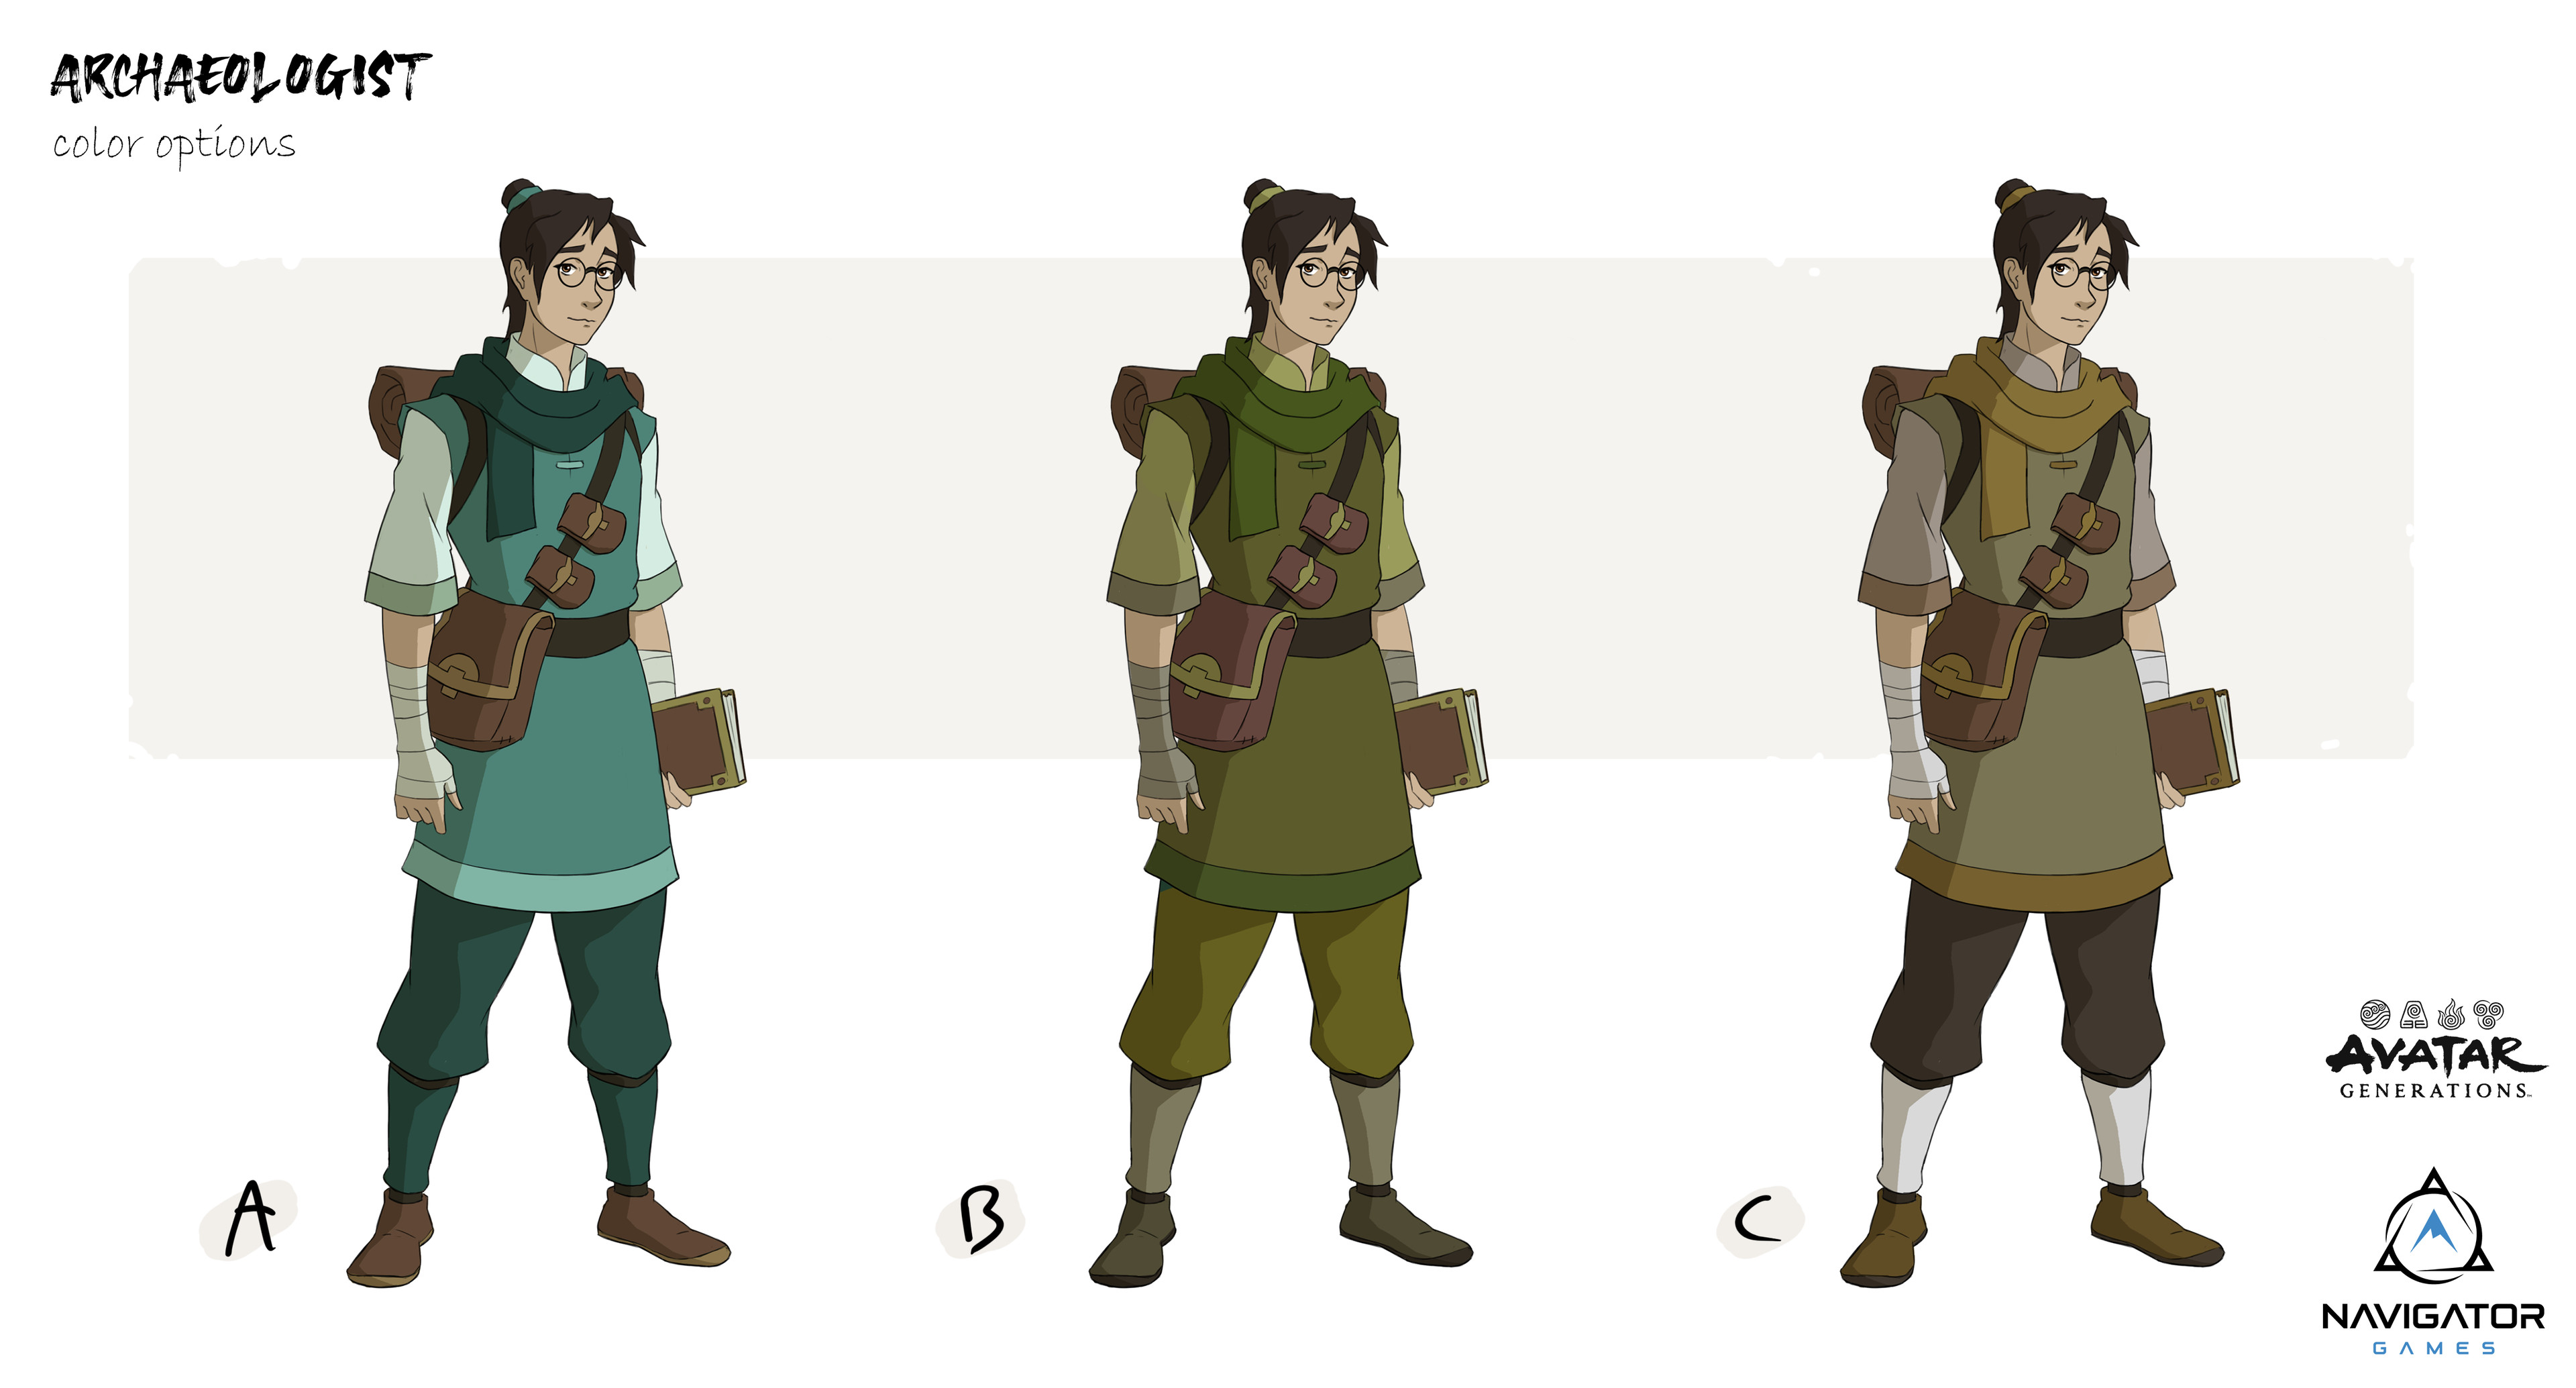 Archaeologist color options